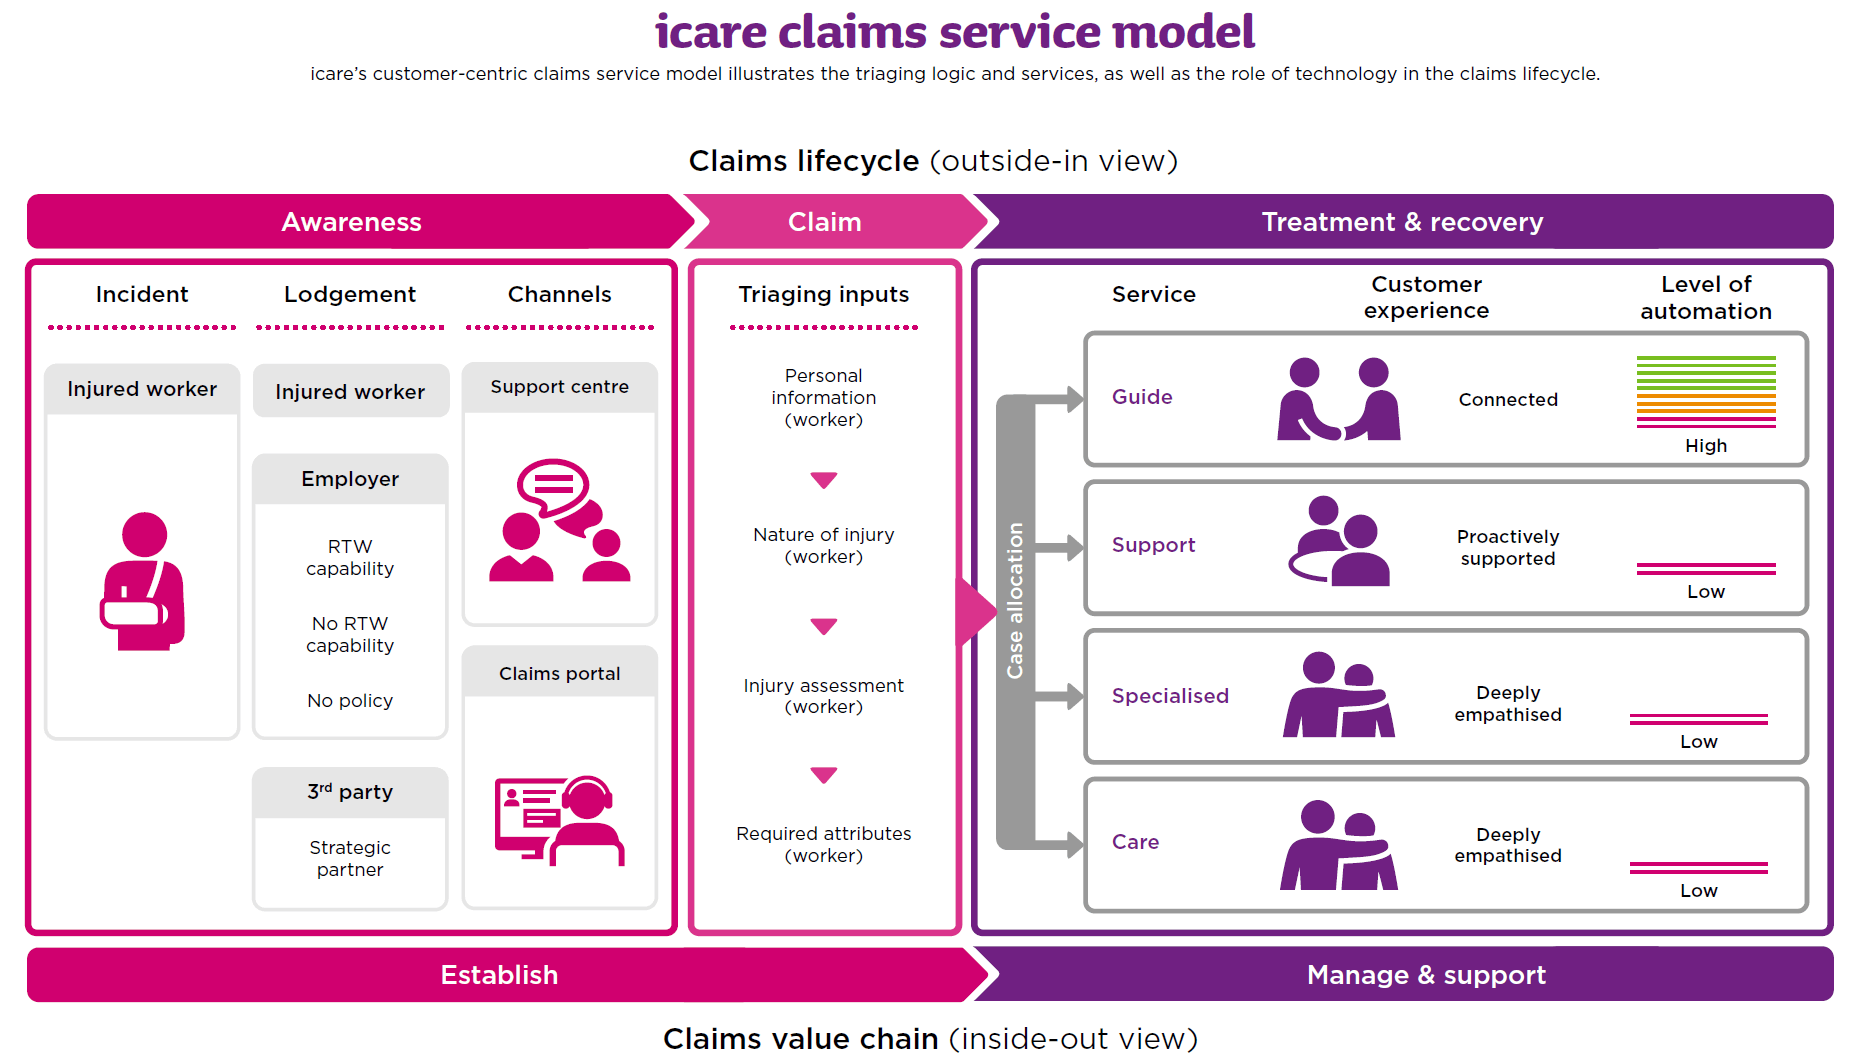 icare's customer-centric claims service model illustrates the triaging logic and services, as we as the role of technology in the claims lifecycle. Download the PDF for full details.